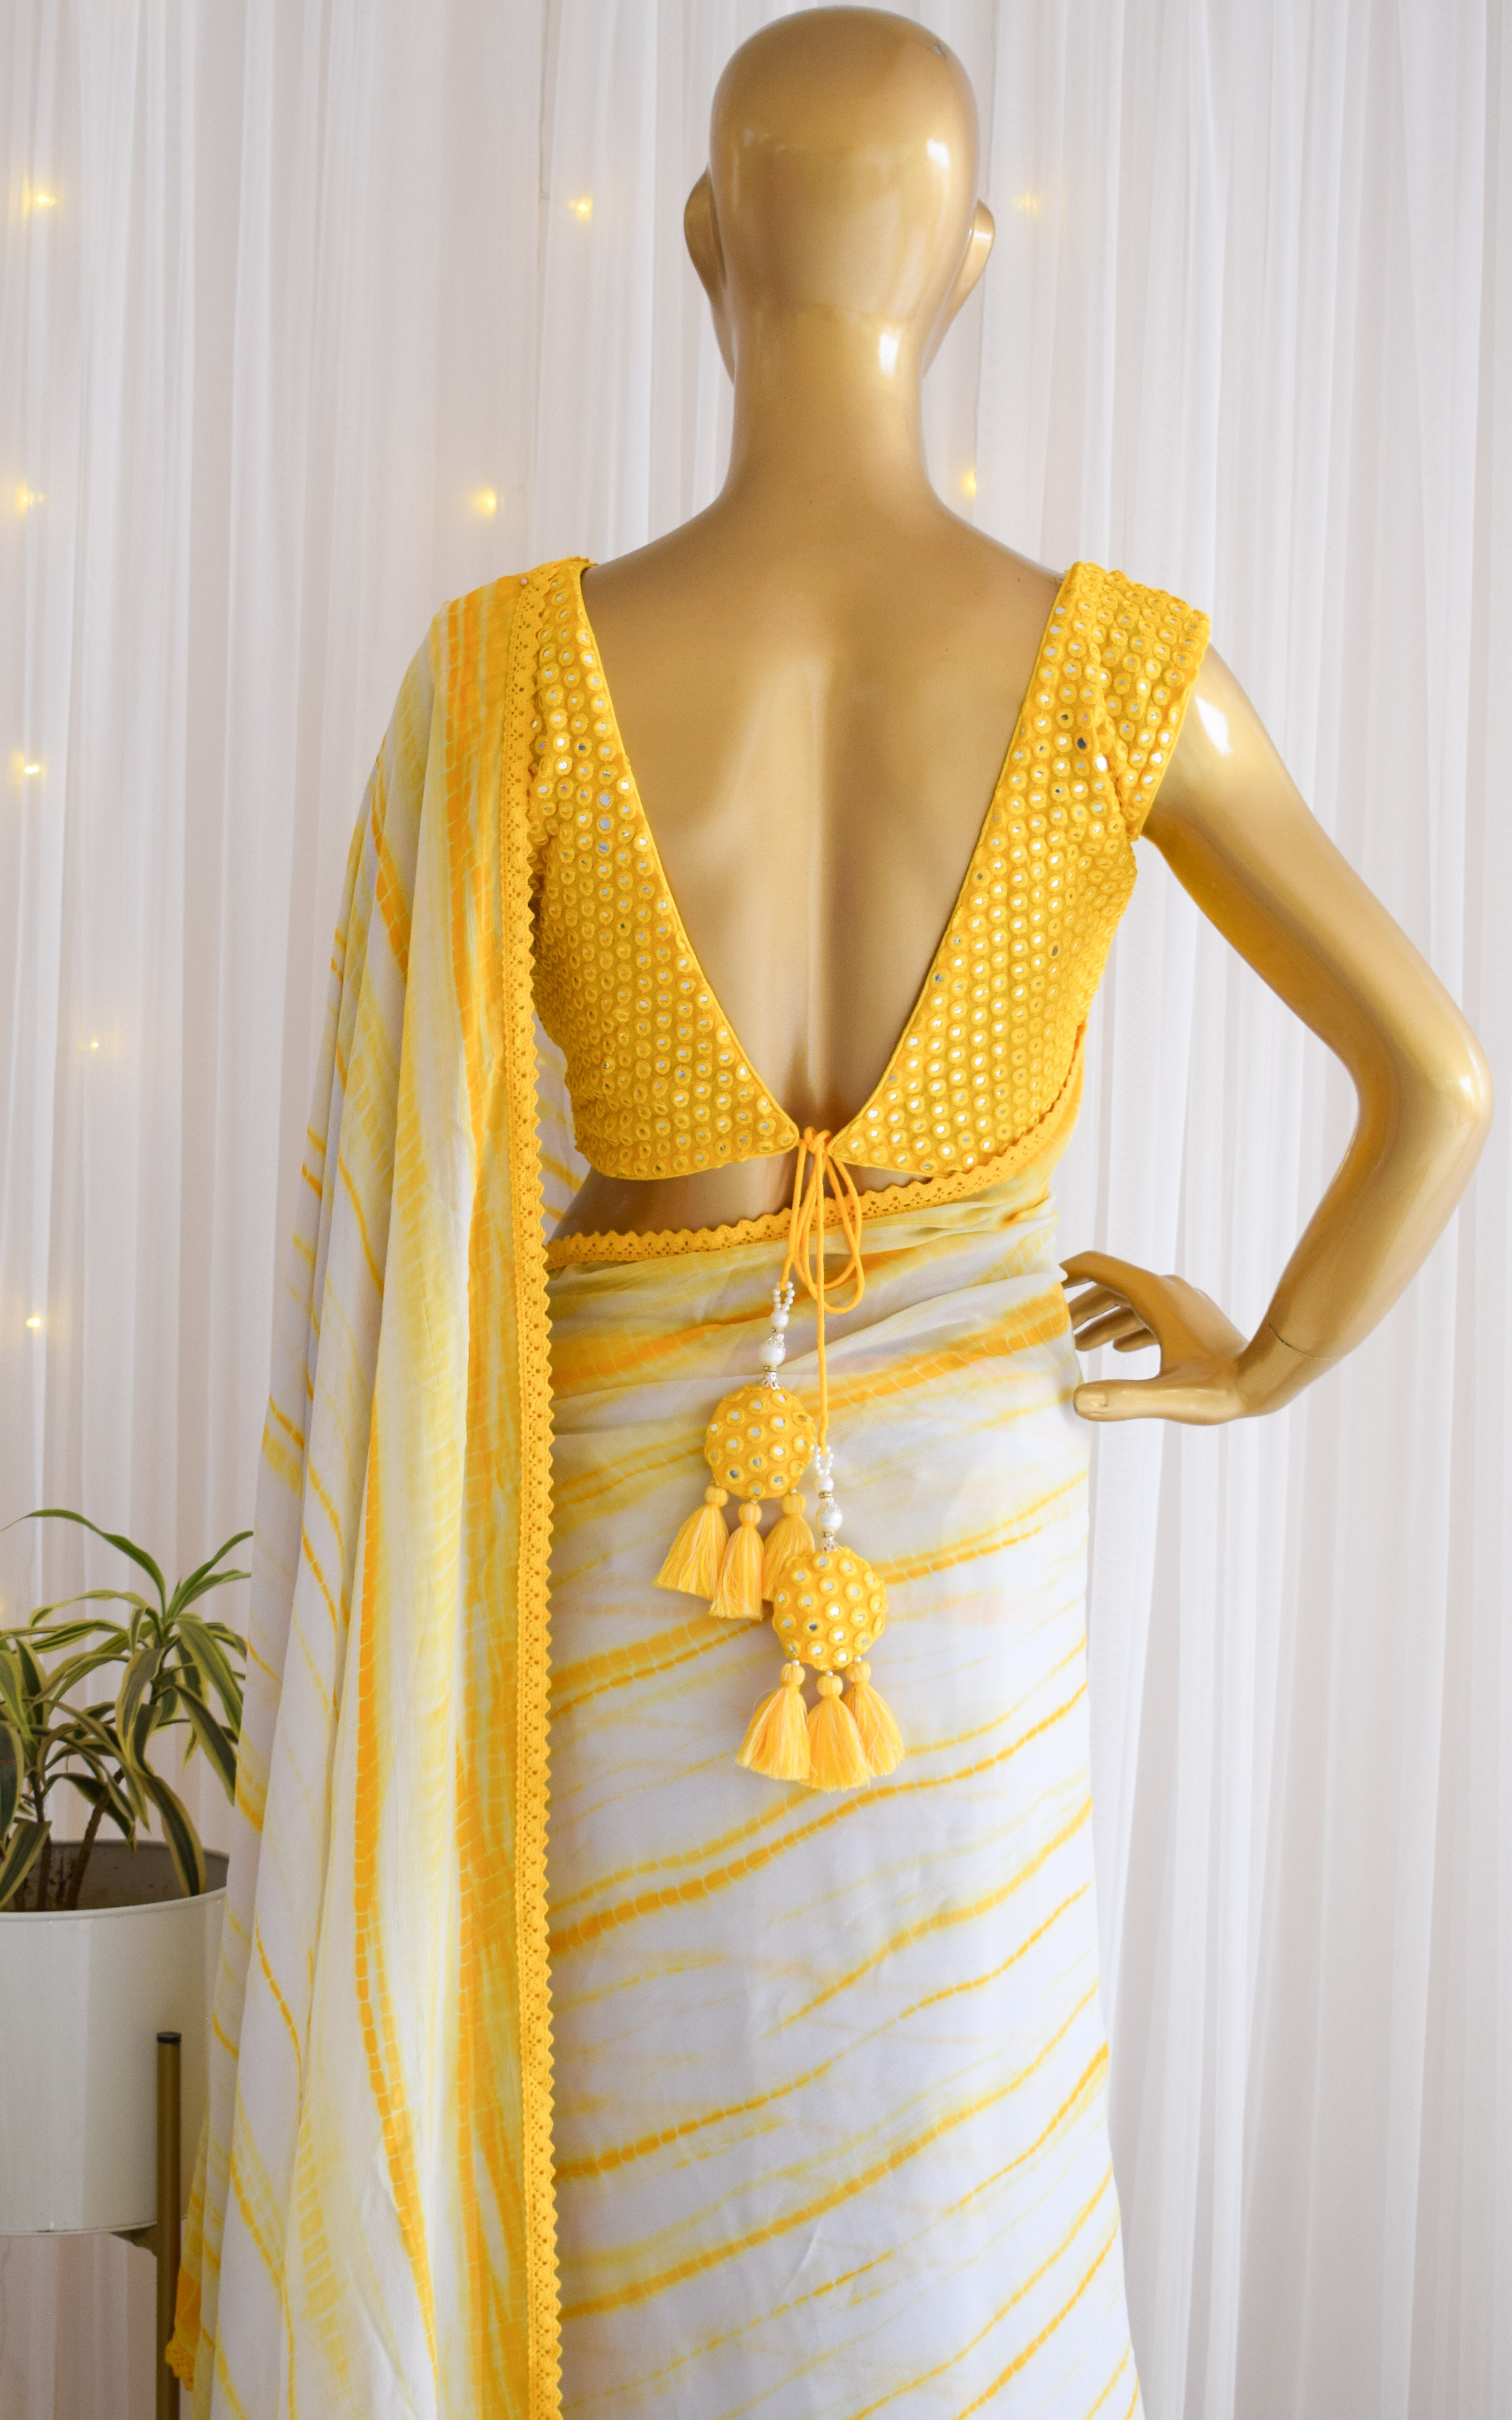 Get Your Pre- Wedding Look With These Mirror Work Sarees